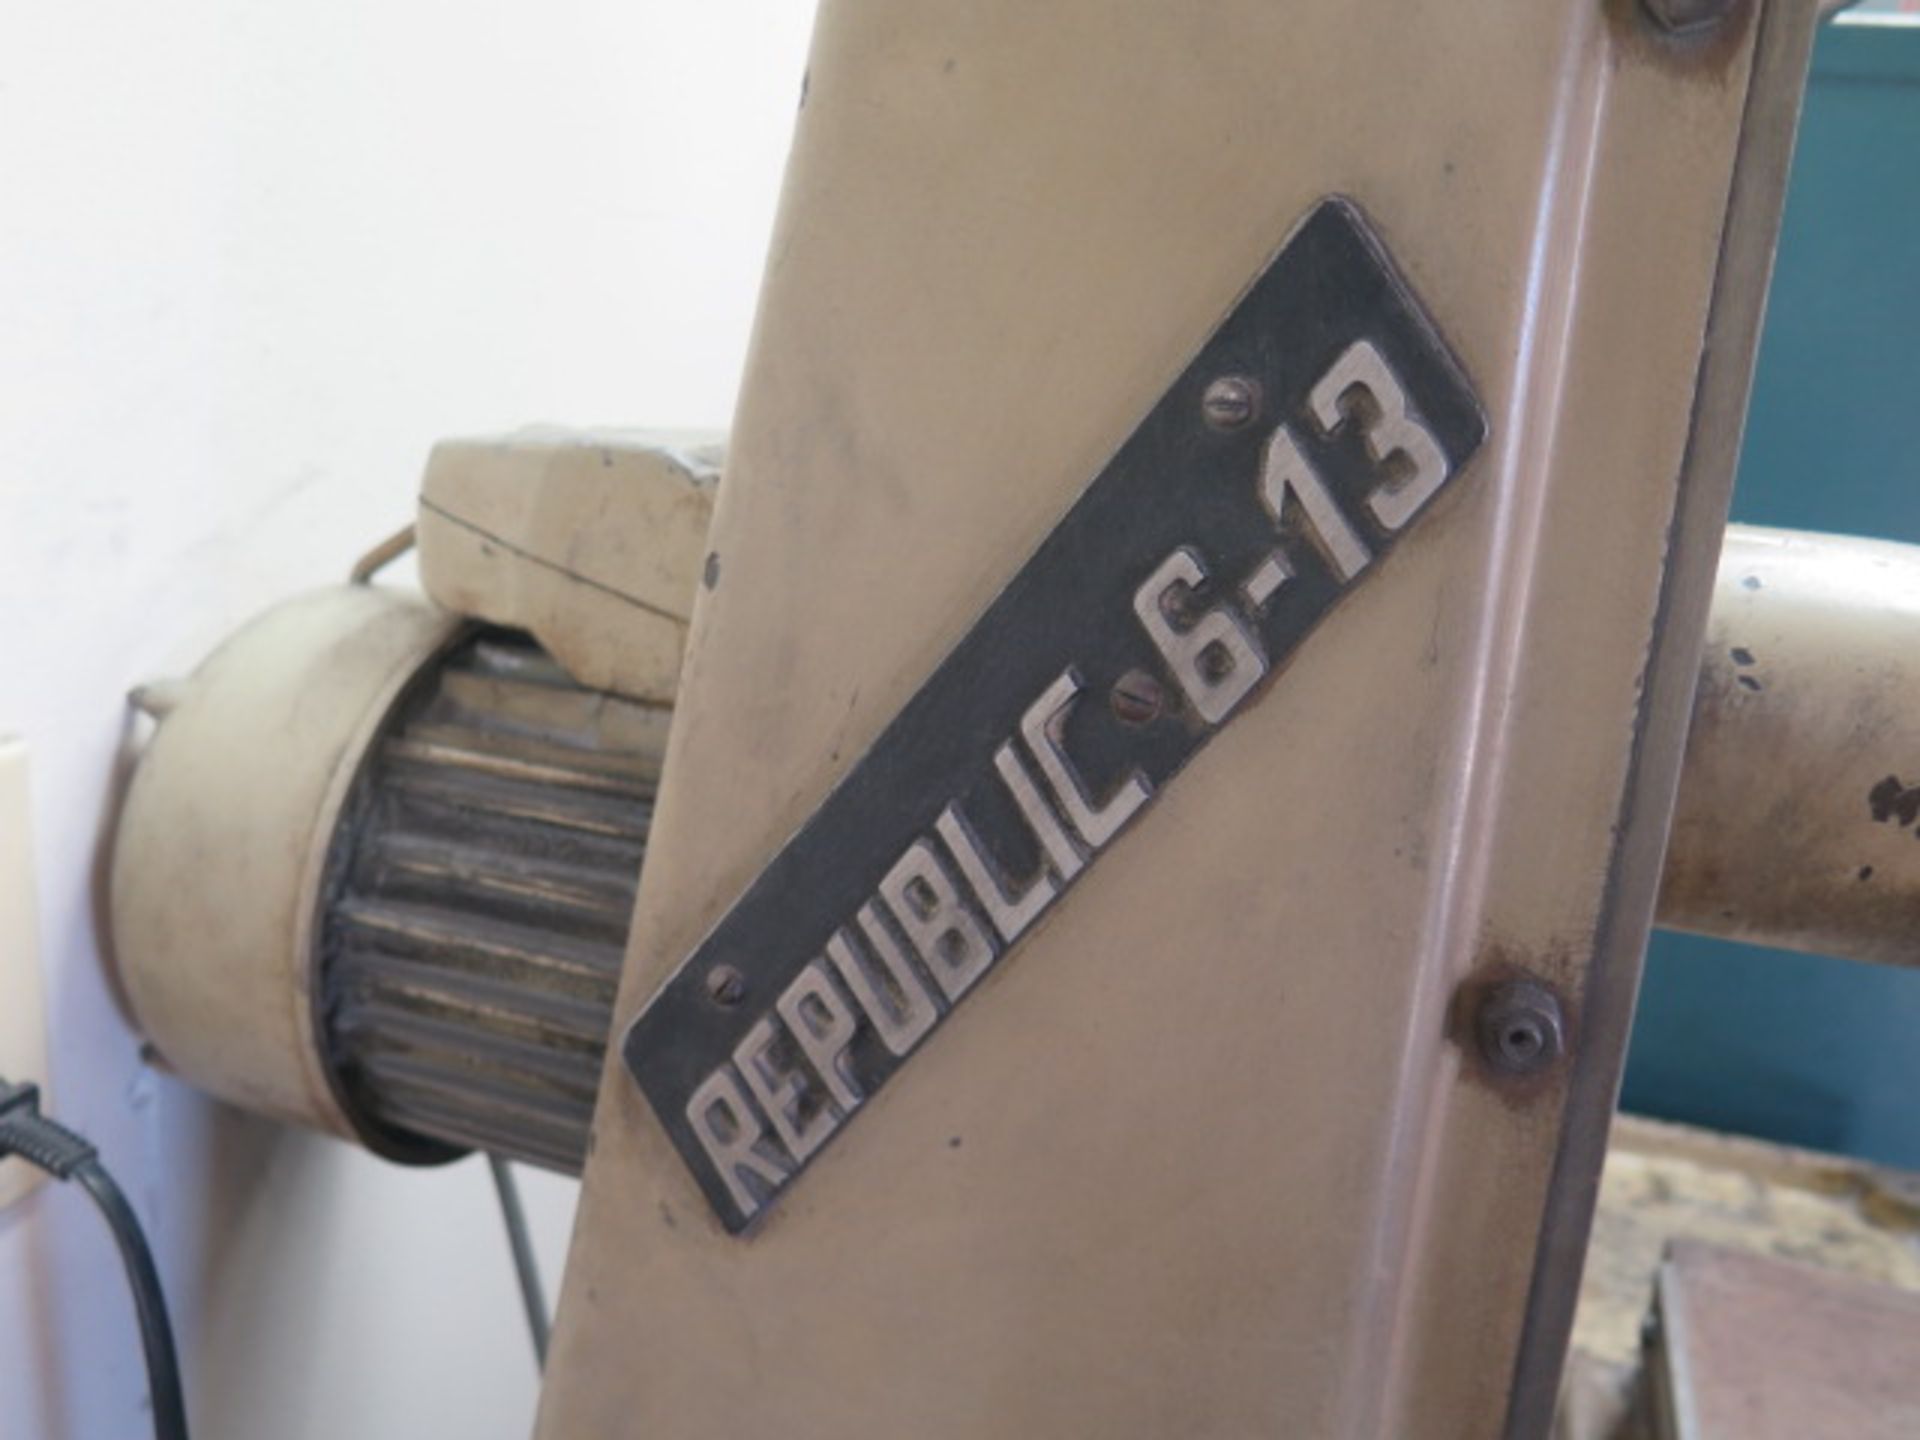 Republic 6” x 12” Surface Grinder (NEEDS NEW MOTOR) (SOLD AS-IS - NO WARRANTY) - Image 6 of 6